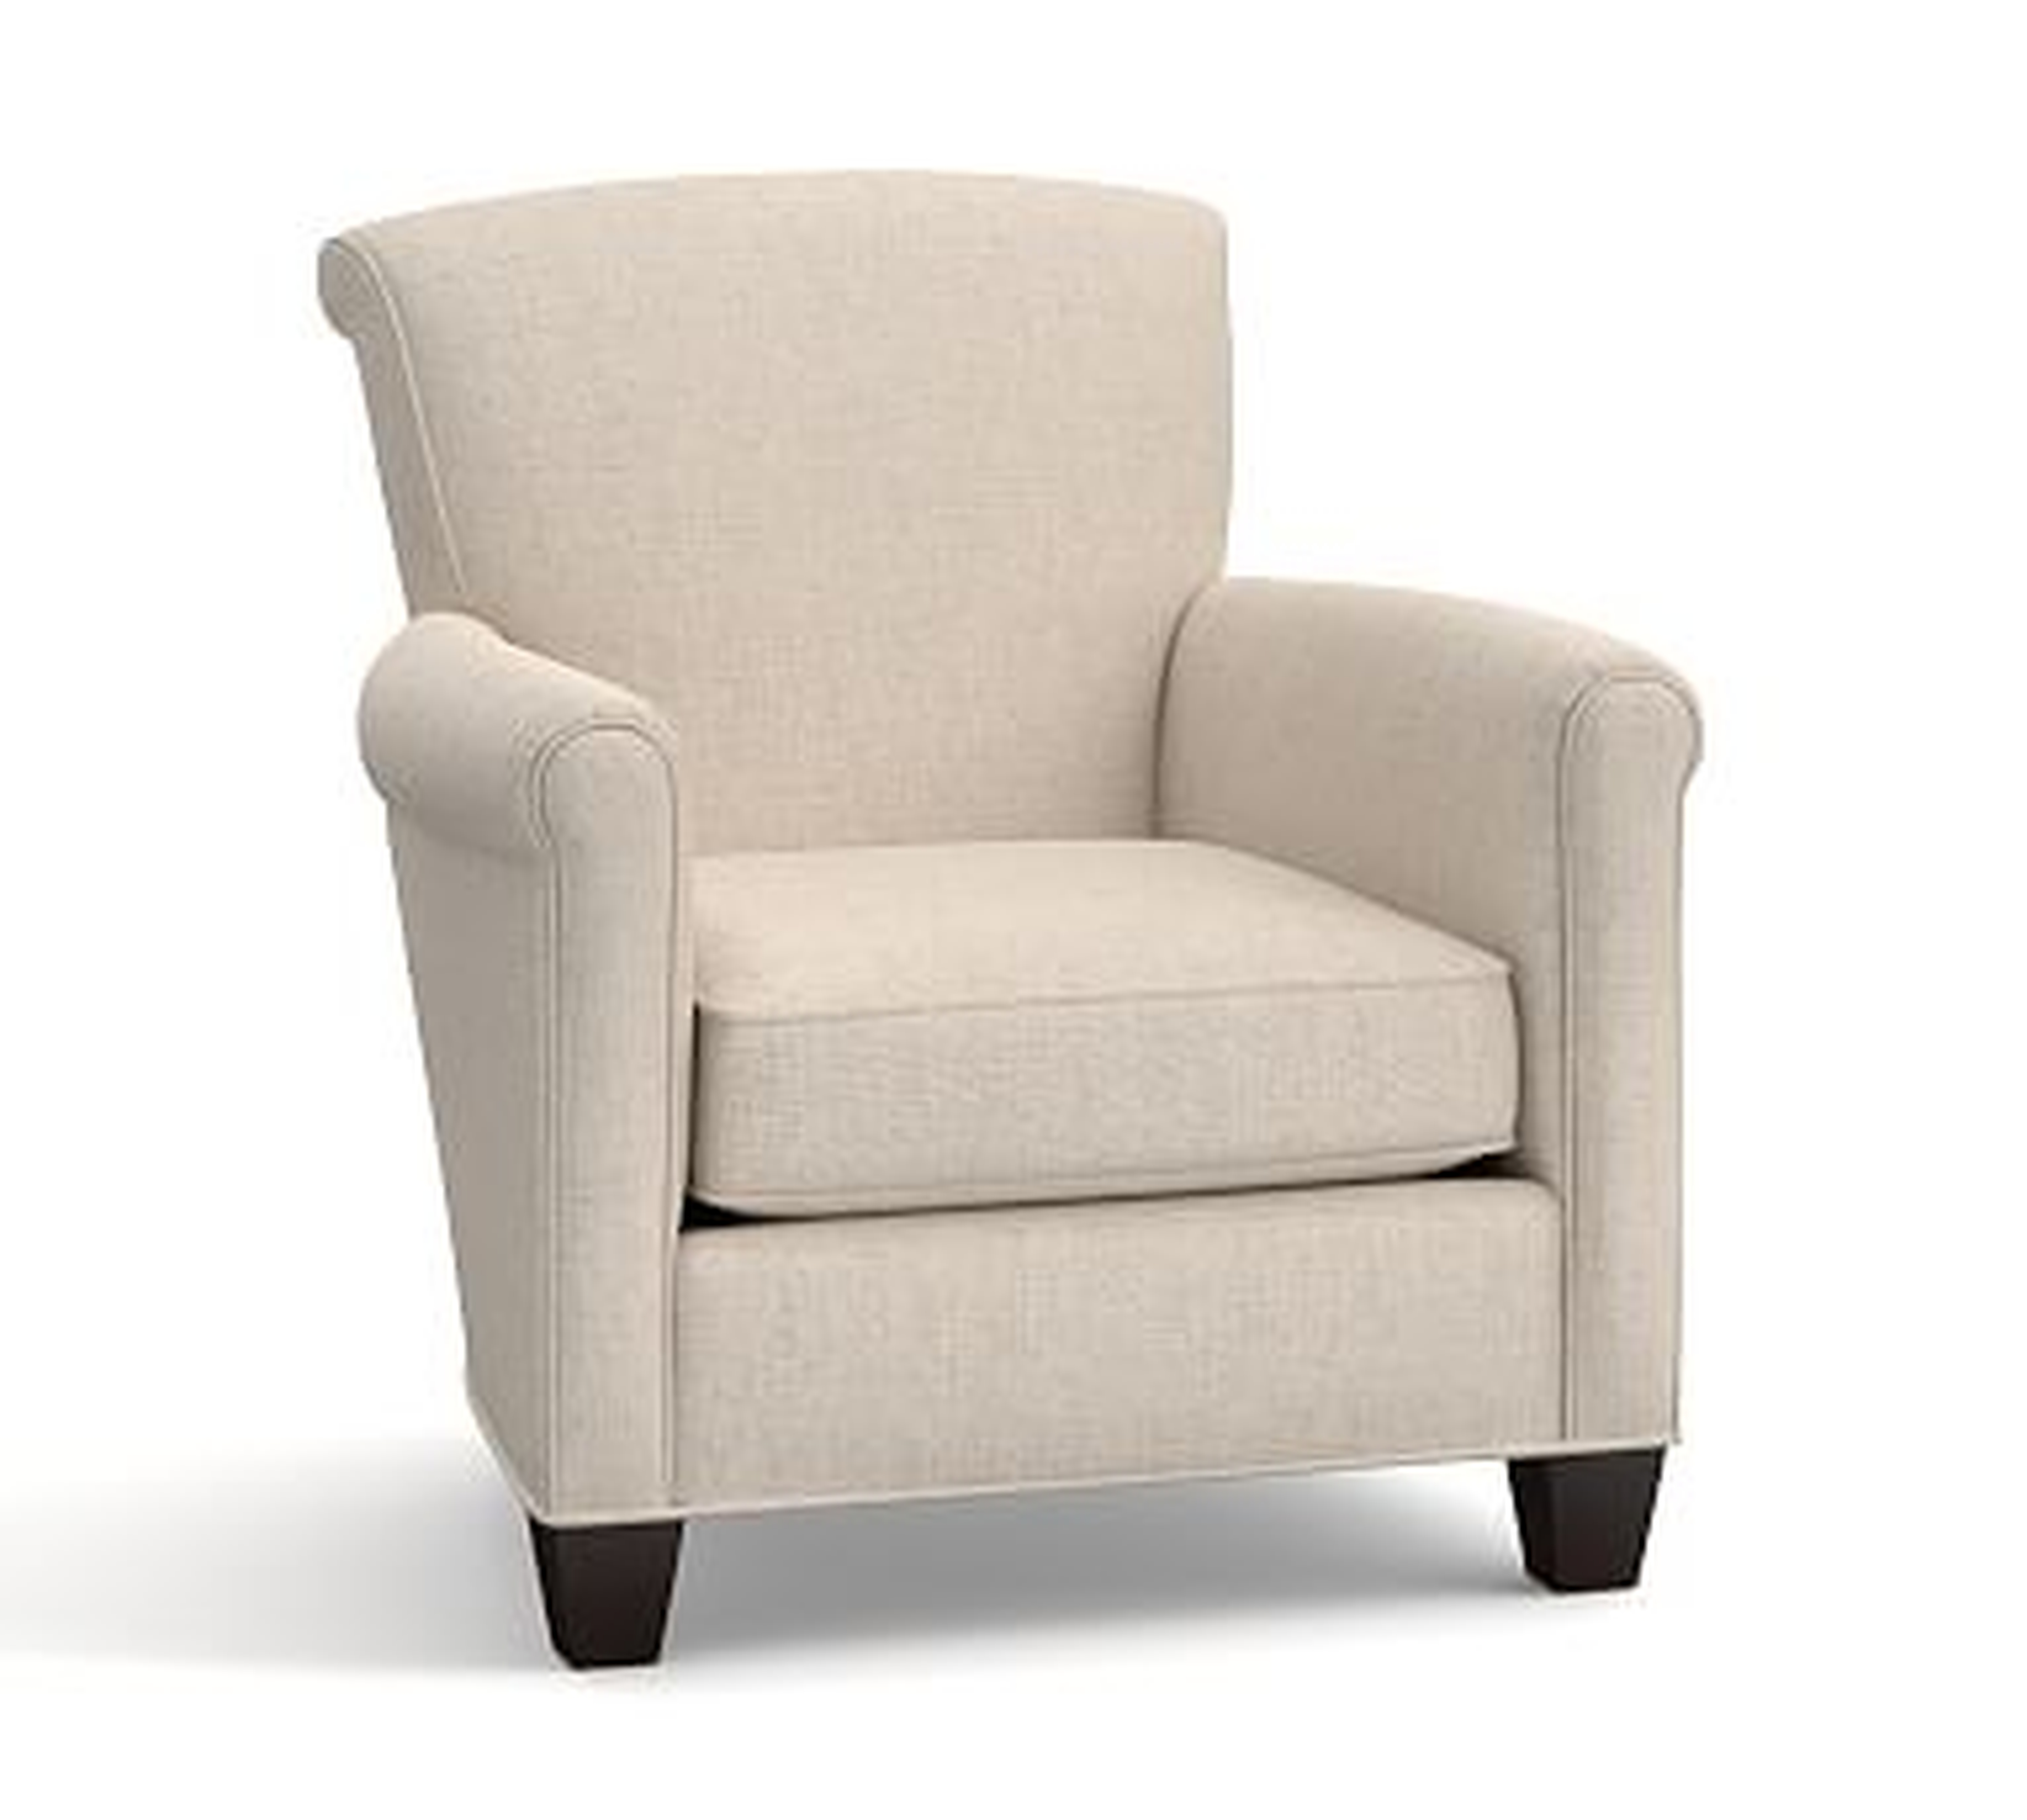 Irving Upholstered Armchair, Polyester Wrapped Cushions, Performance Everydaylinen(TM) by Crypton(R) Home Oatmeal - Pottery Barn